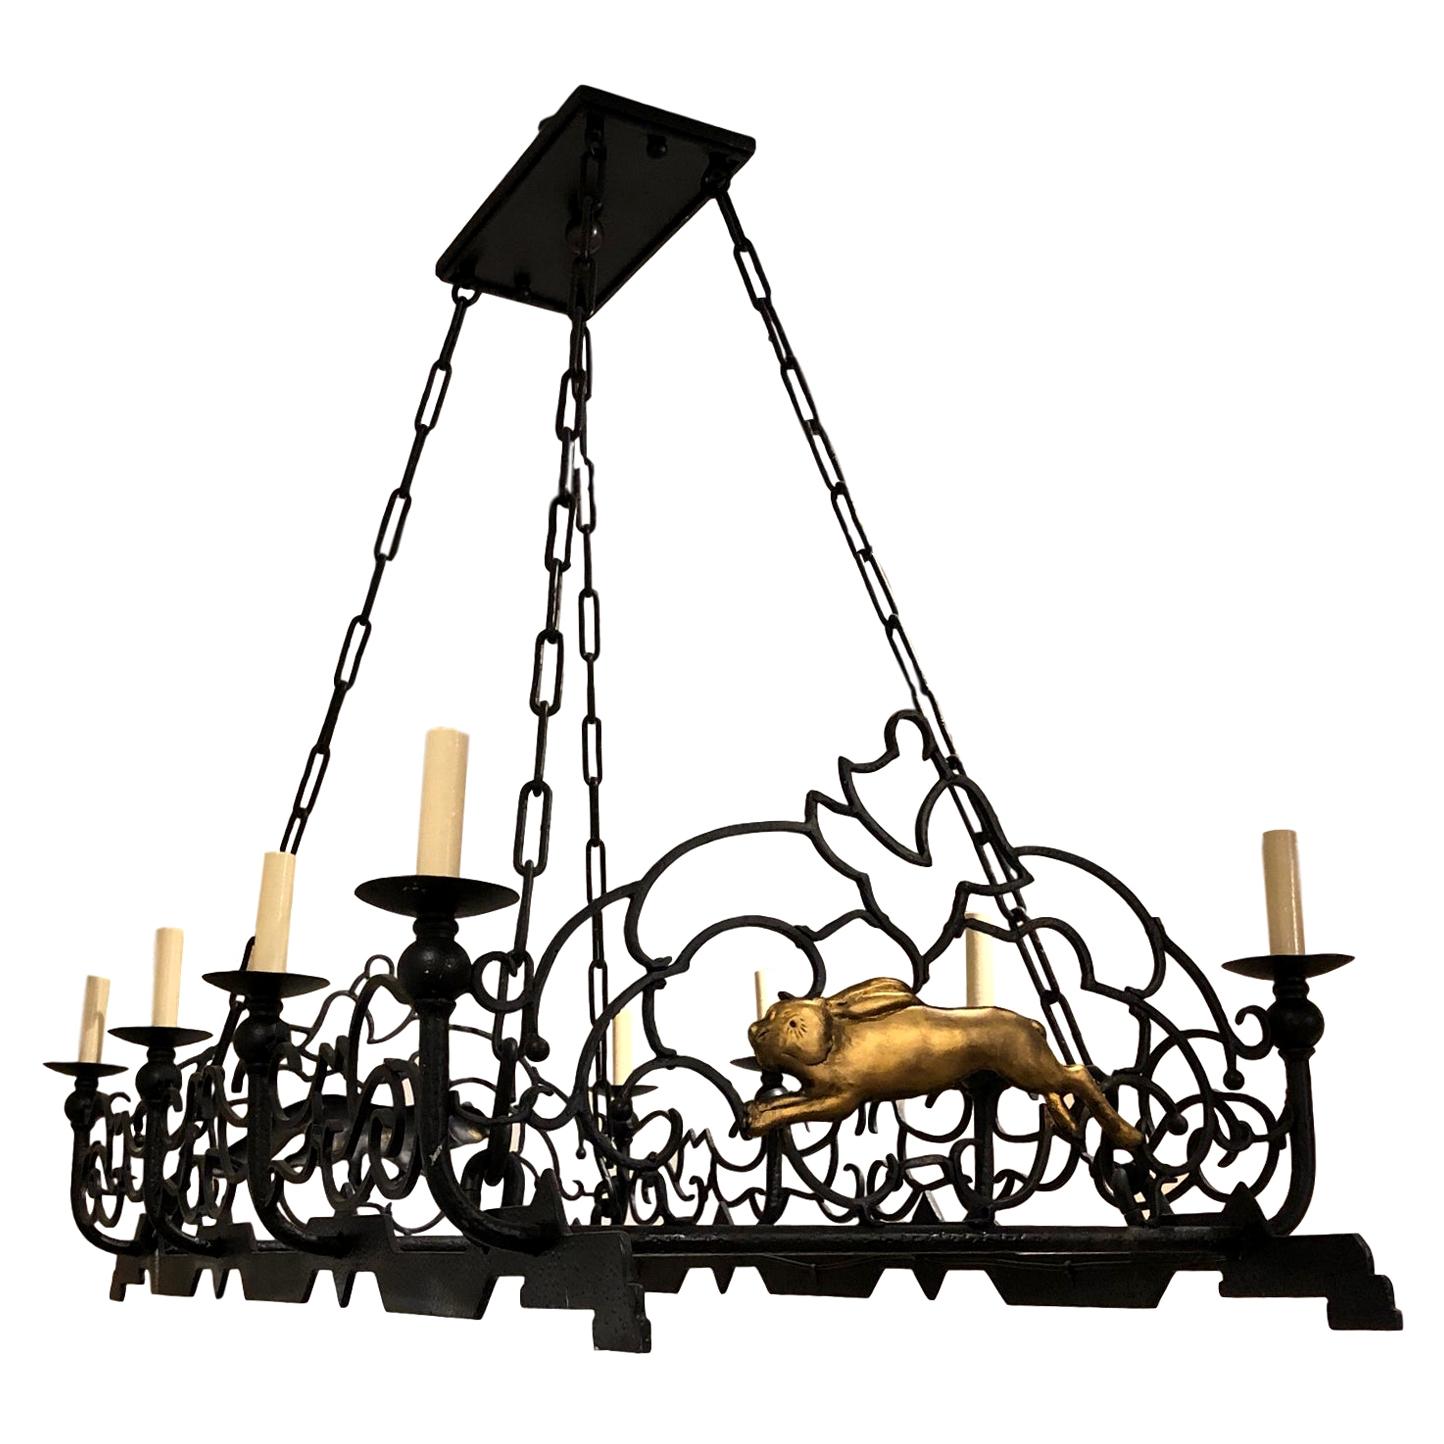 Horizontal Wrought Iron Chandelier For Sale